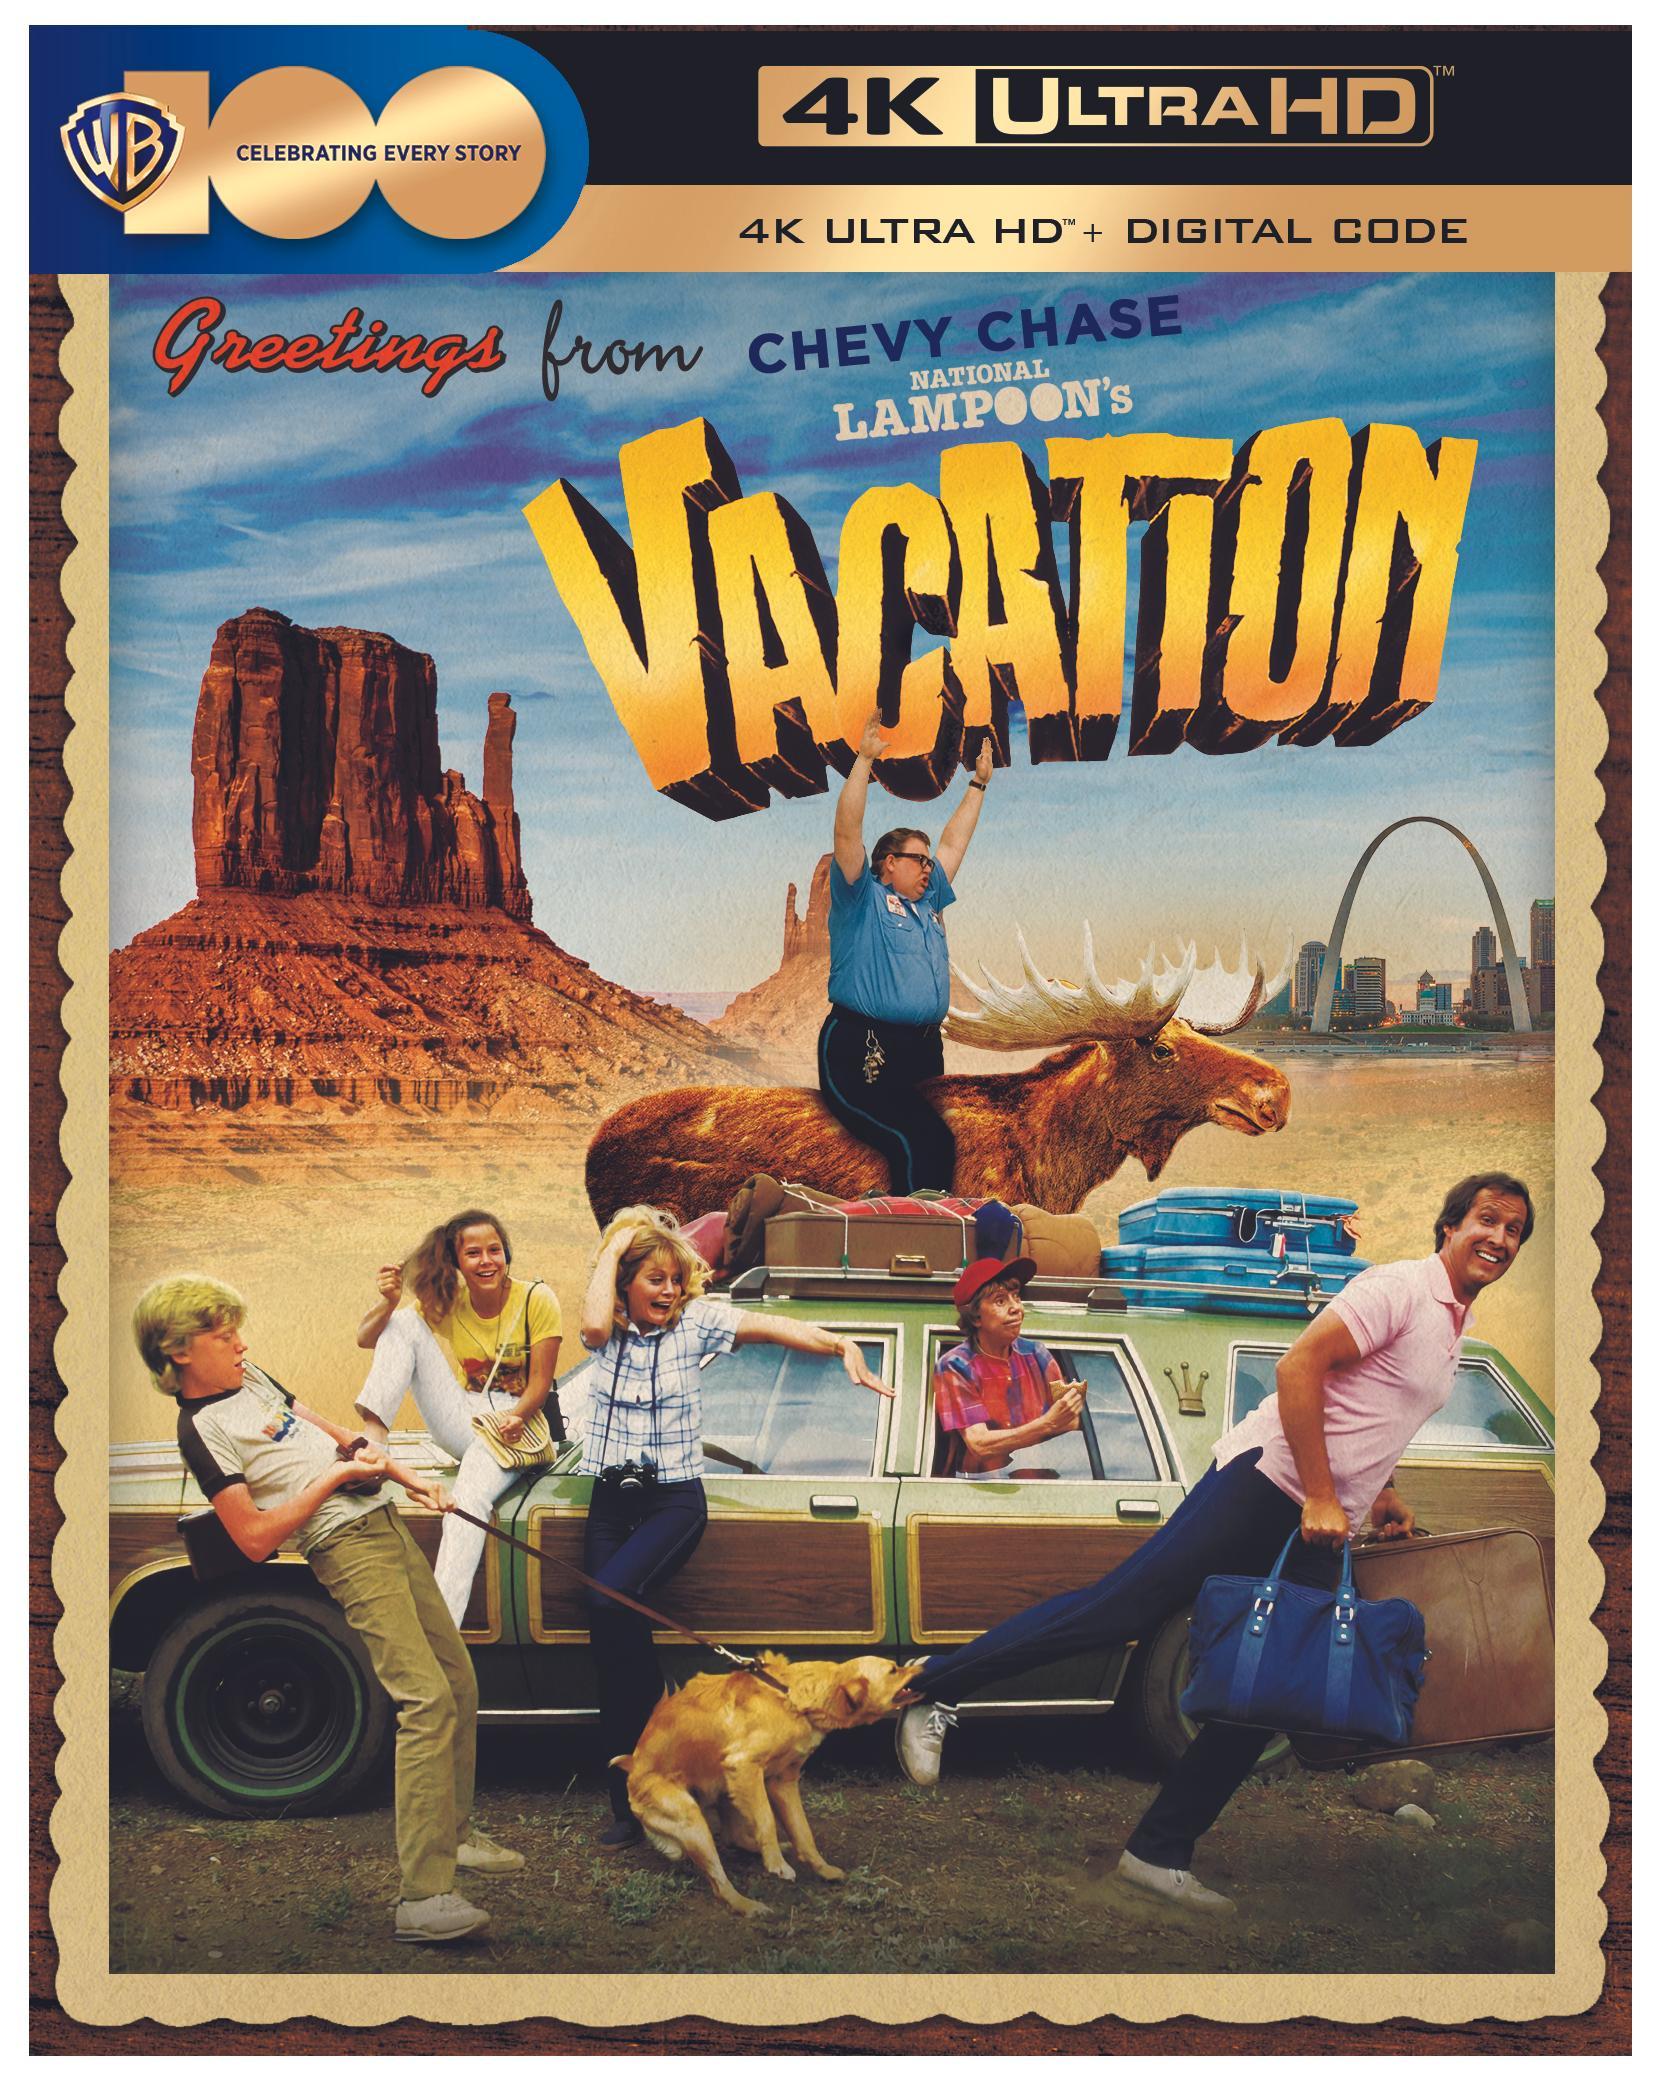 National Lampoon's Vacation Comes to 4K for its 40th Anniversary